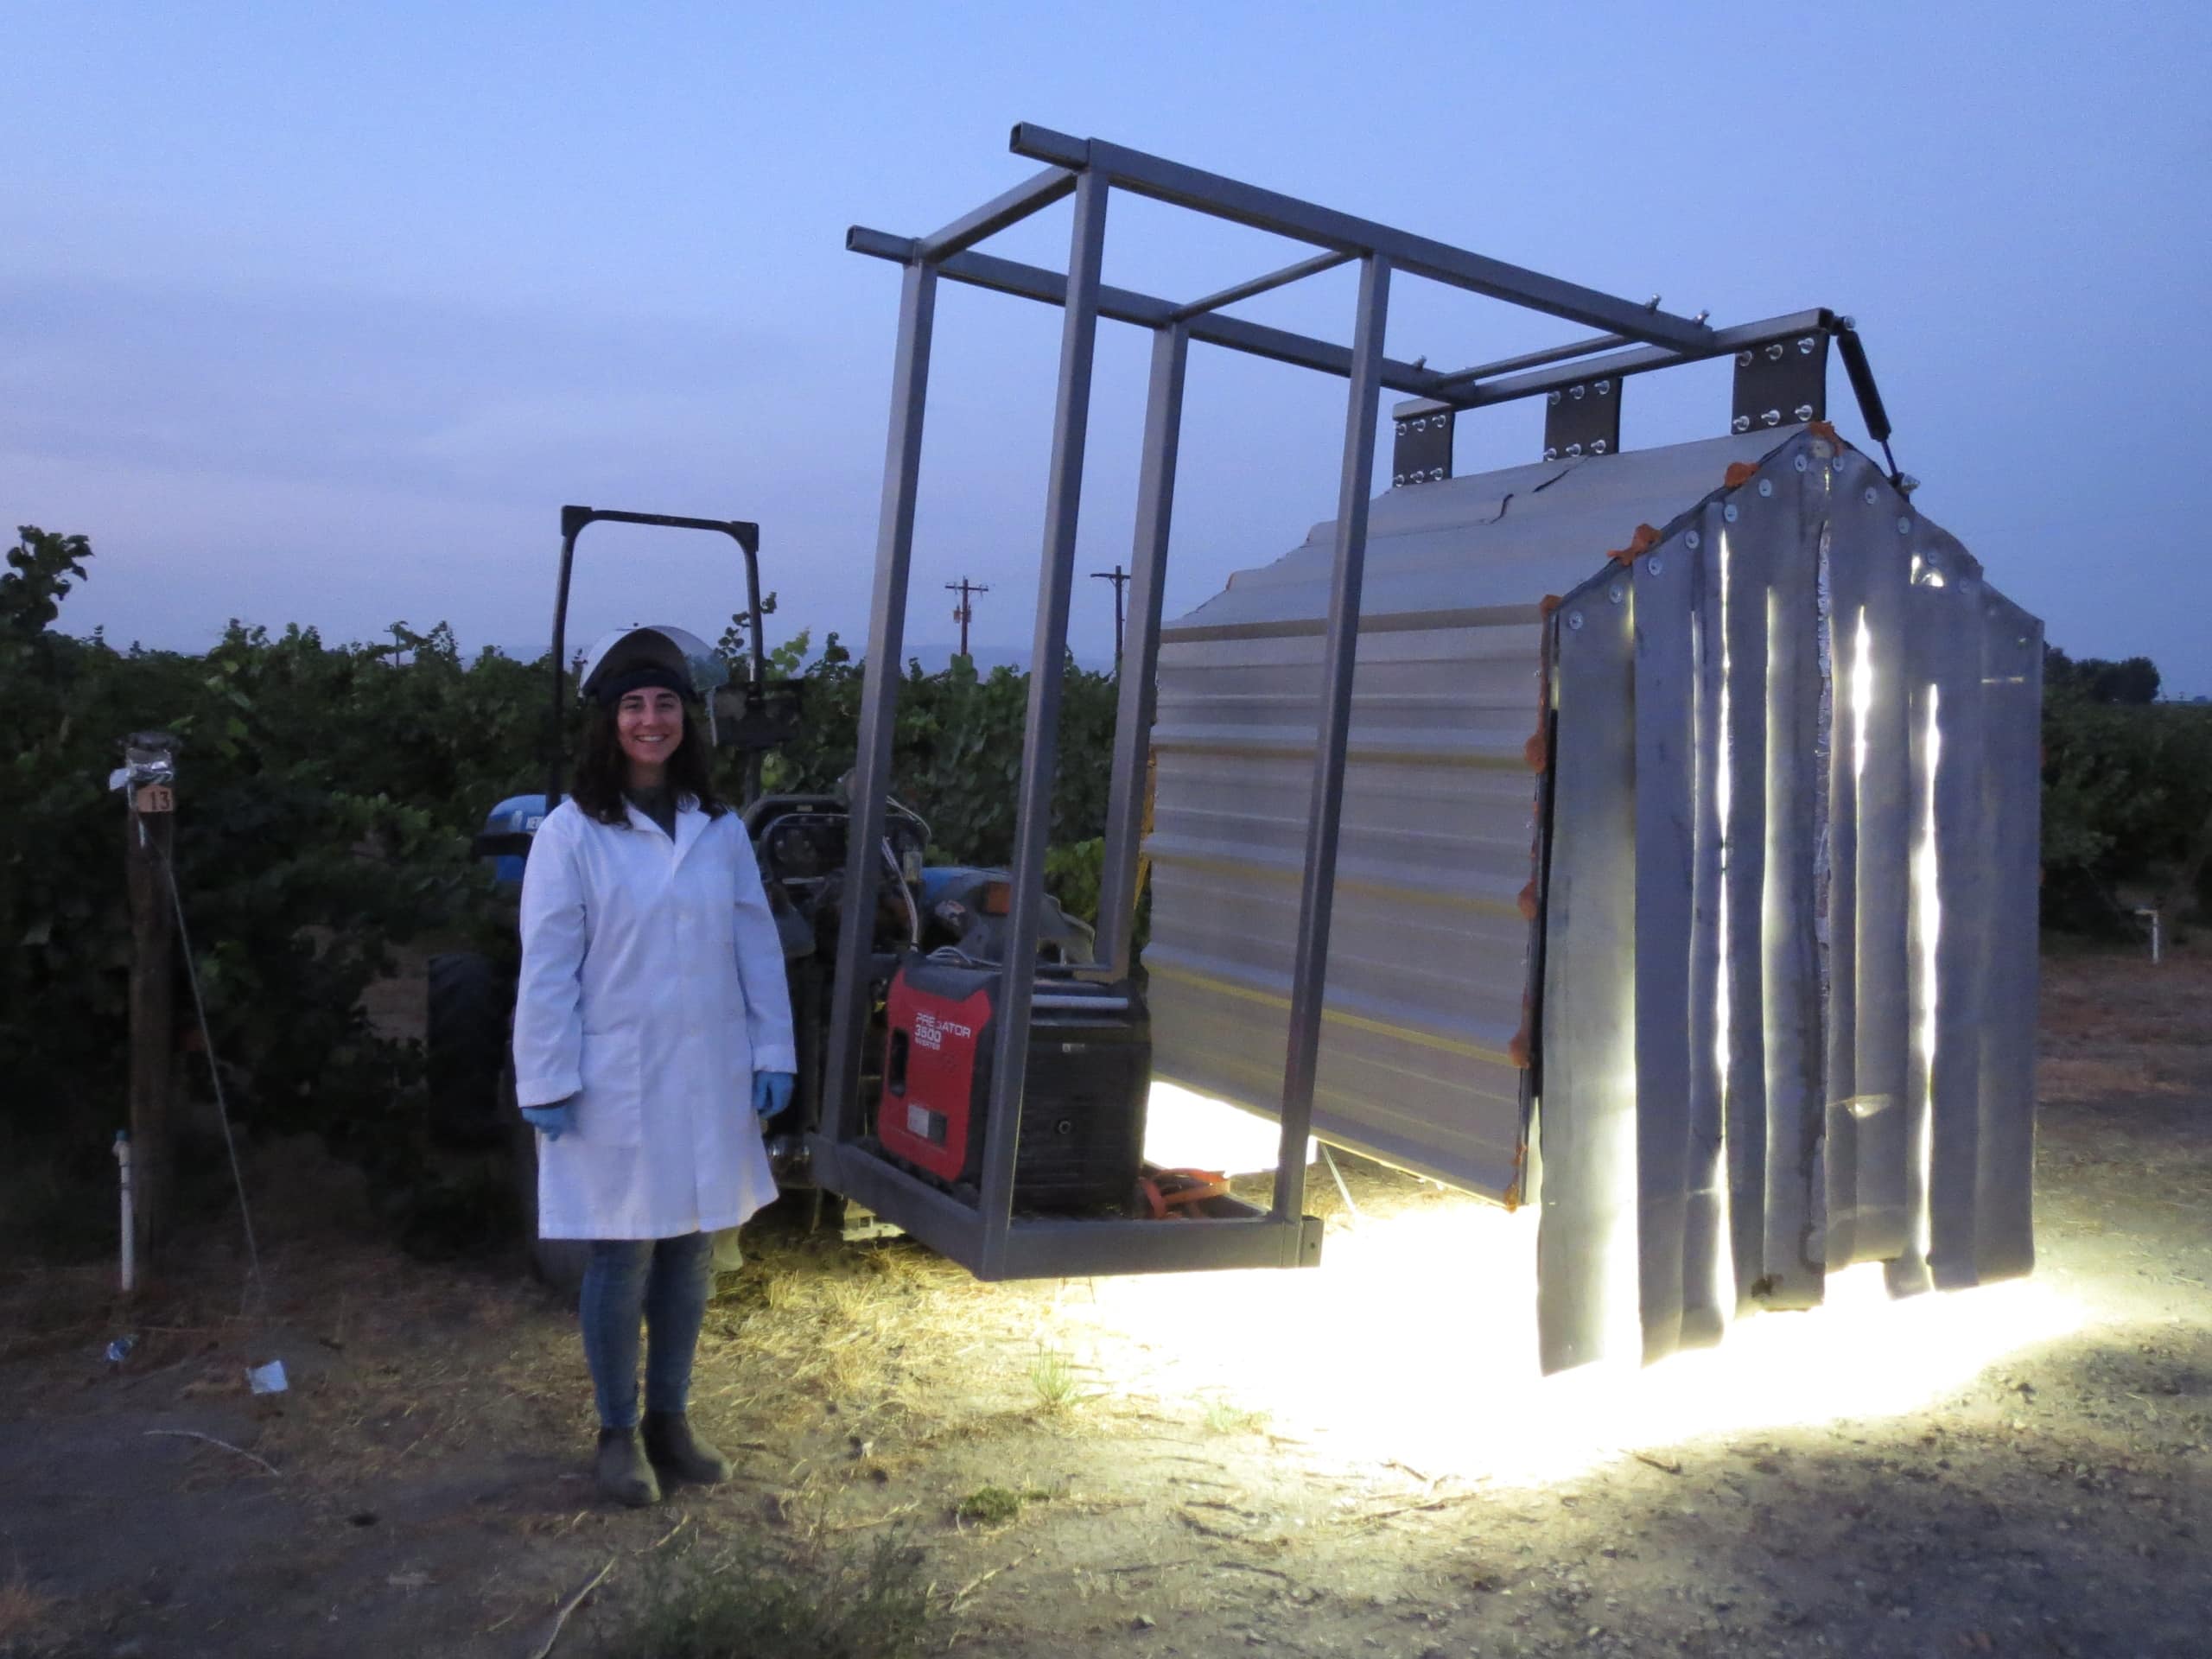 UVC light array is driven over the vine at night to treat vines for grape powdery mildew.